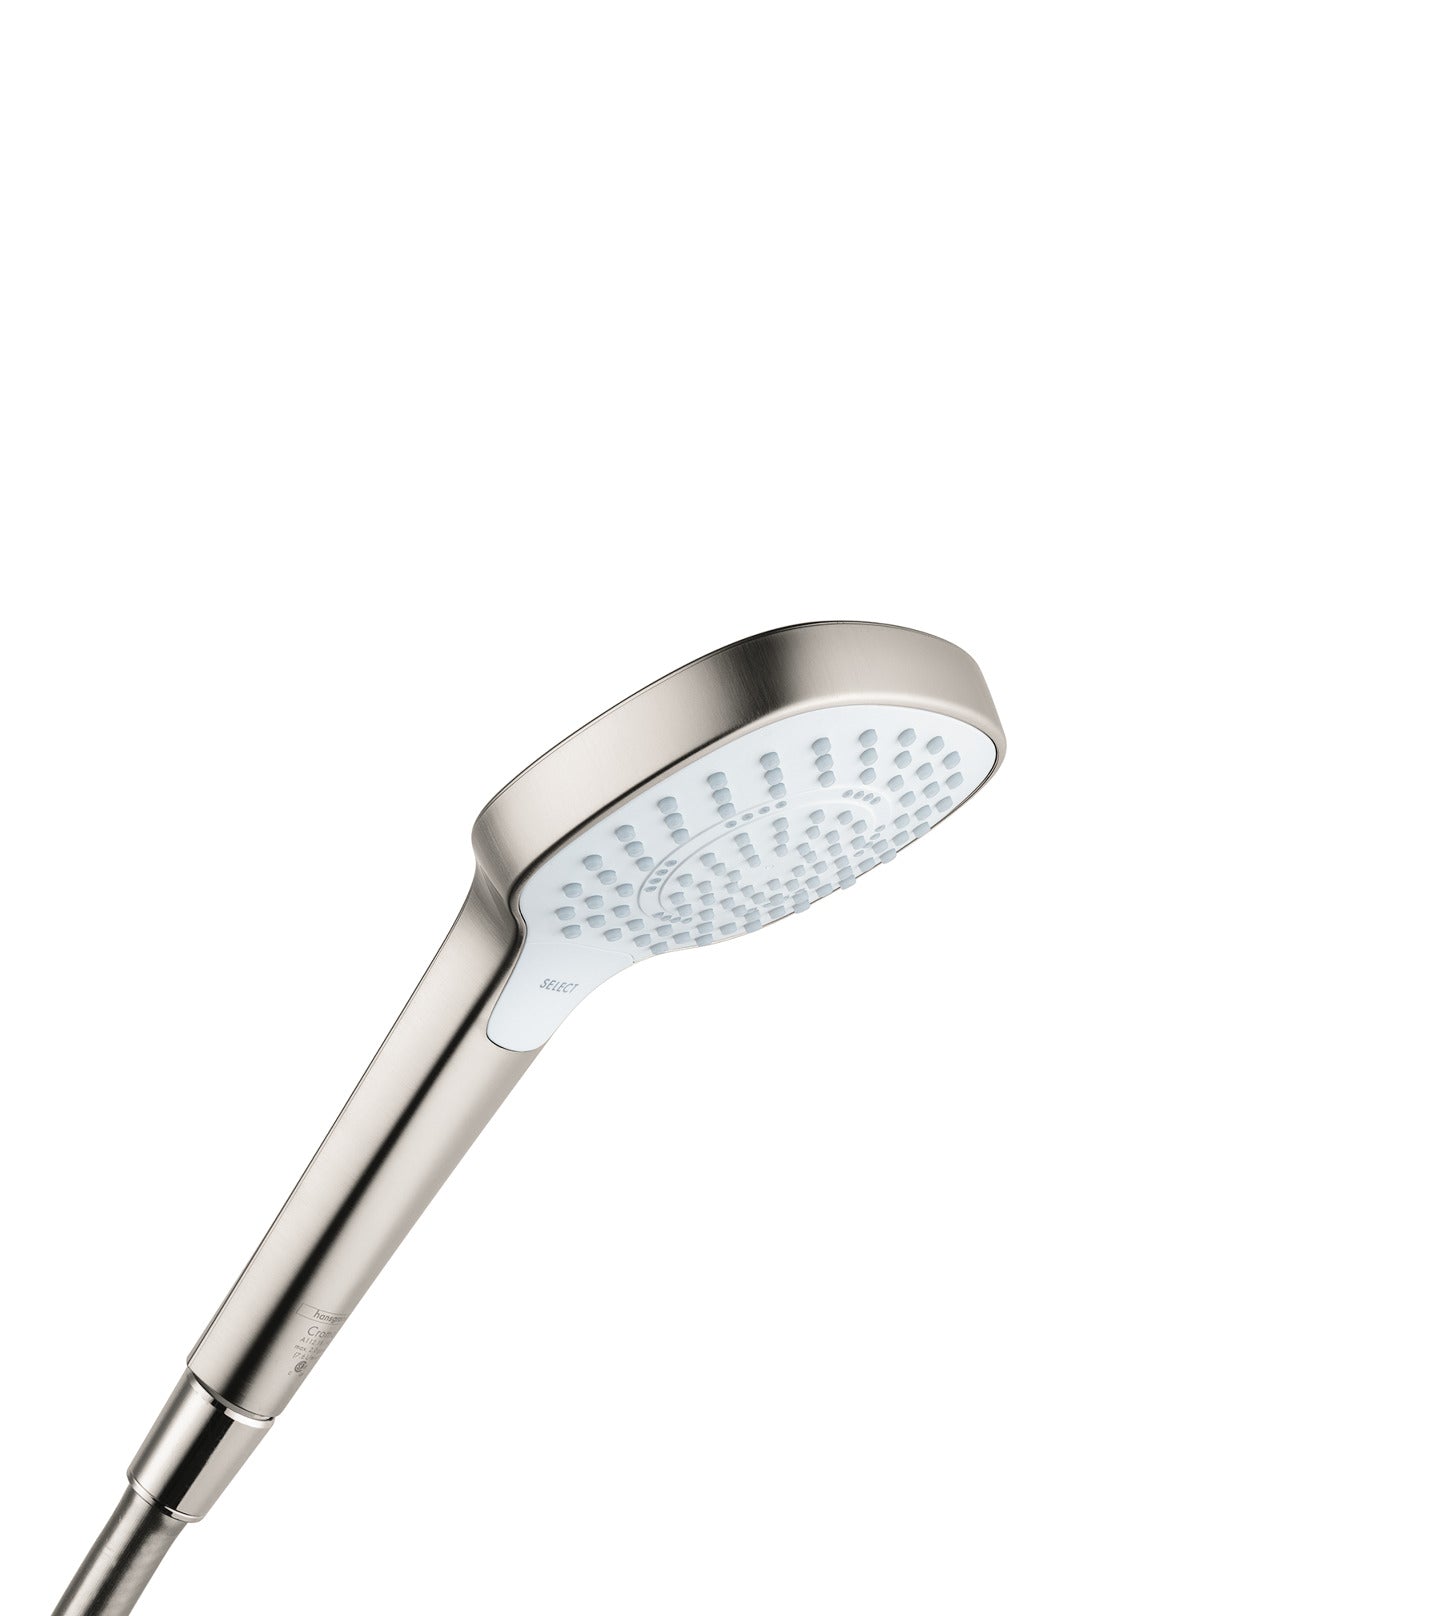 HANSGROHE 04723820 Brushed Nickel Croma Select E Modern Handshower 1.75 GPM